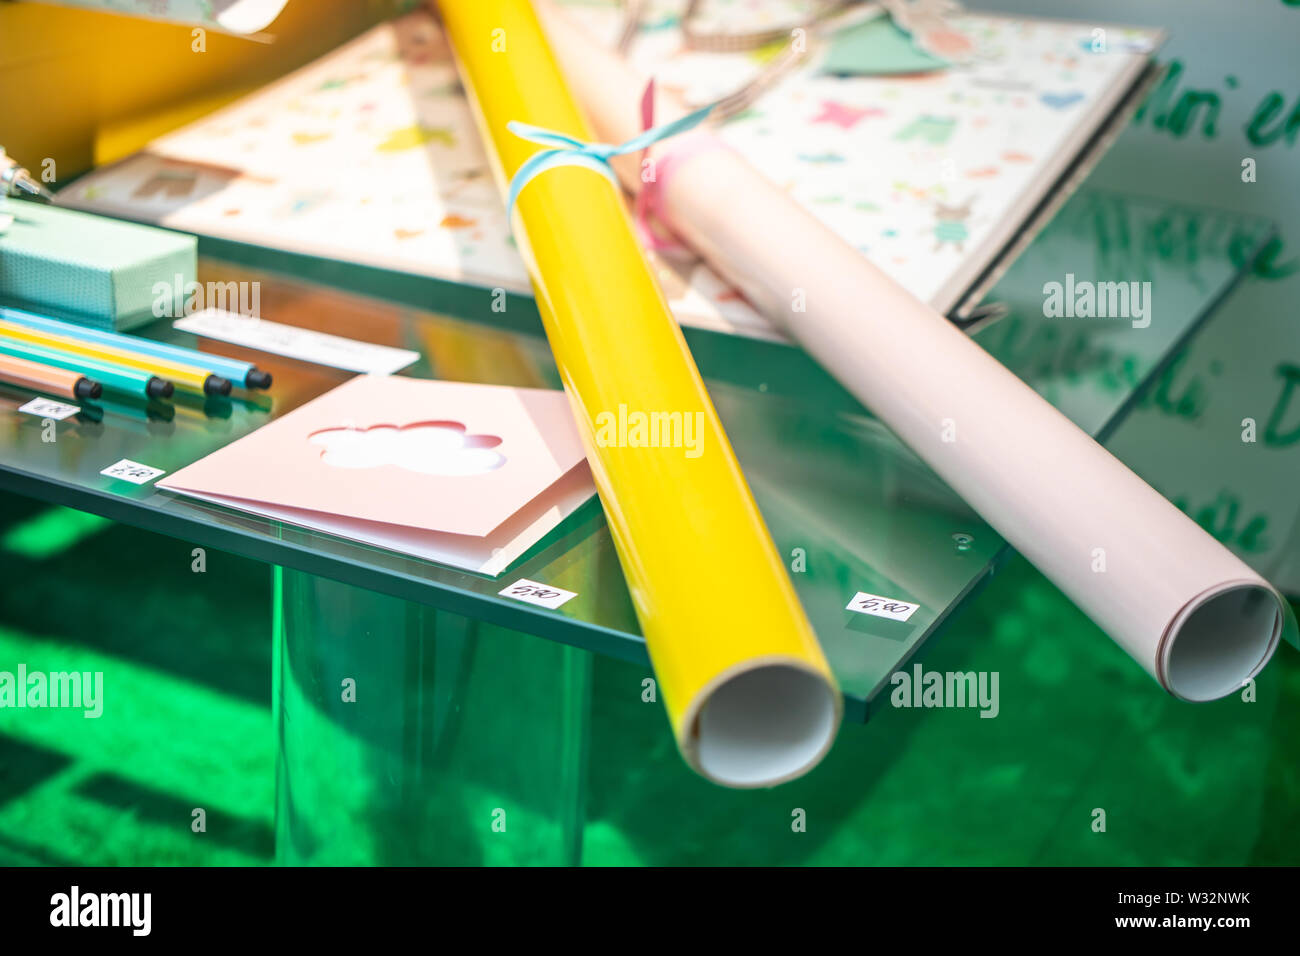 Geneva, Switzerland, Mar 2019 stylish stationery Papeterie Brachard store, office accessories, color paper, clips, pencils, price on display for sale Stock Photo